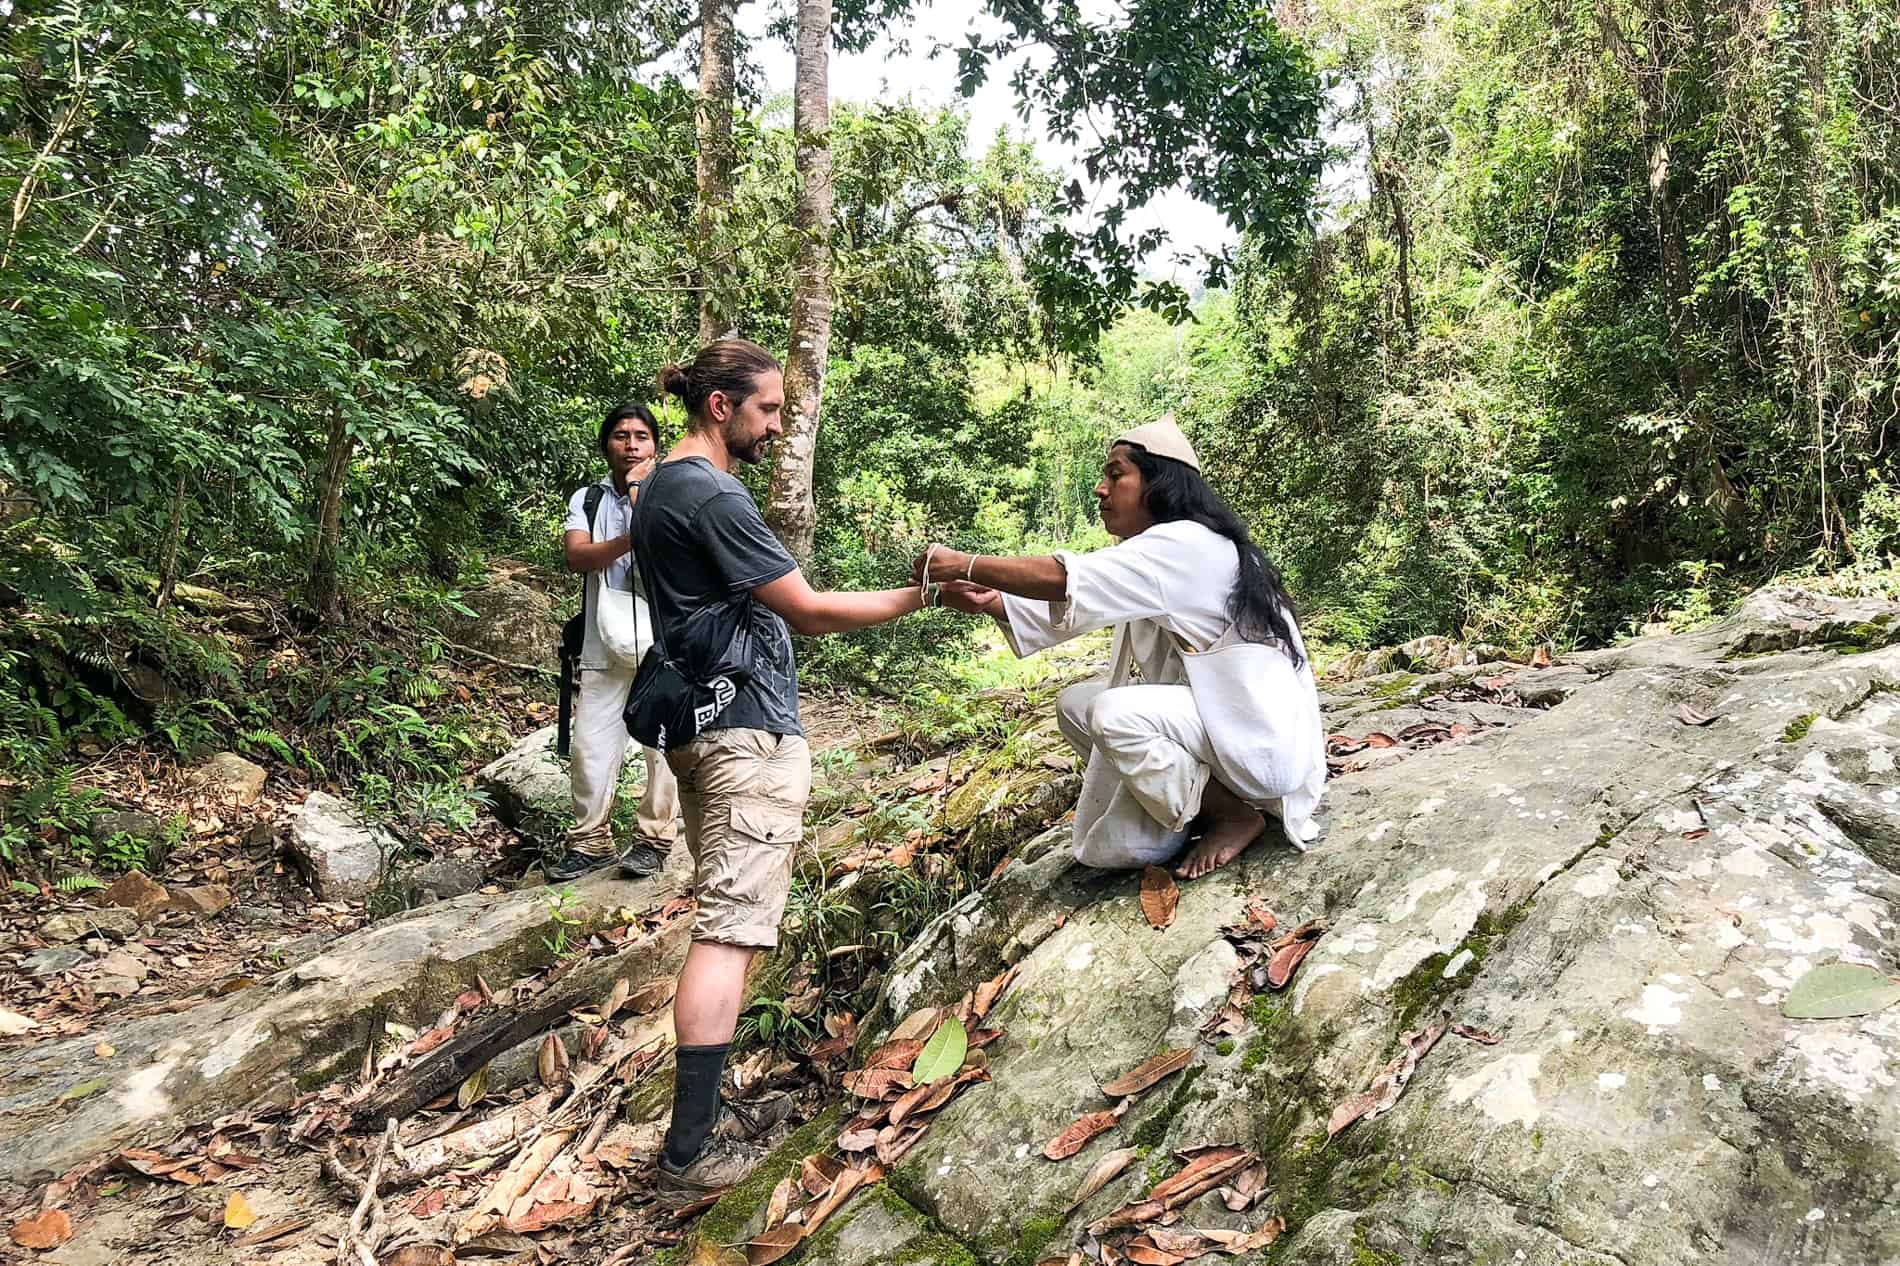 A Wiwa mamo blessing a passenger on the Lost City Trek in Colombia. 